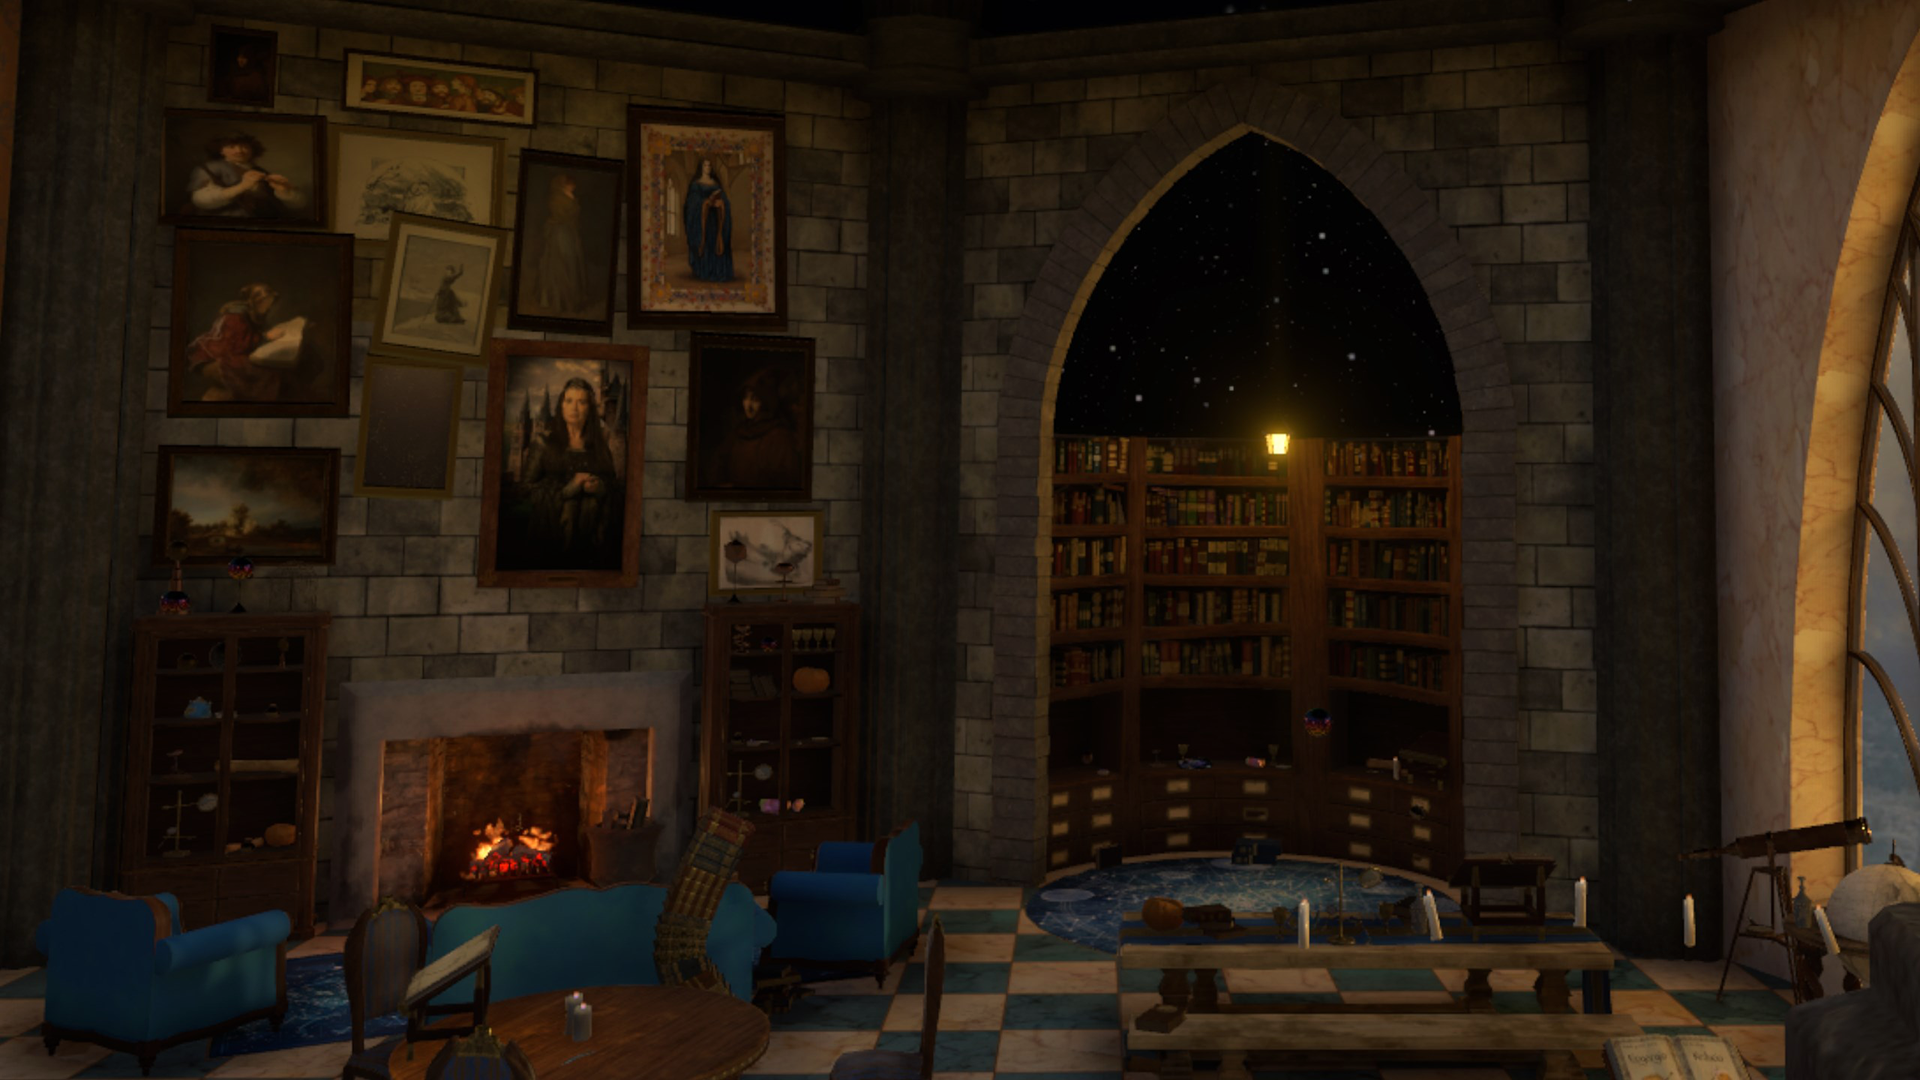 Ravenclaw Common Room Vr By Colincw